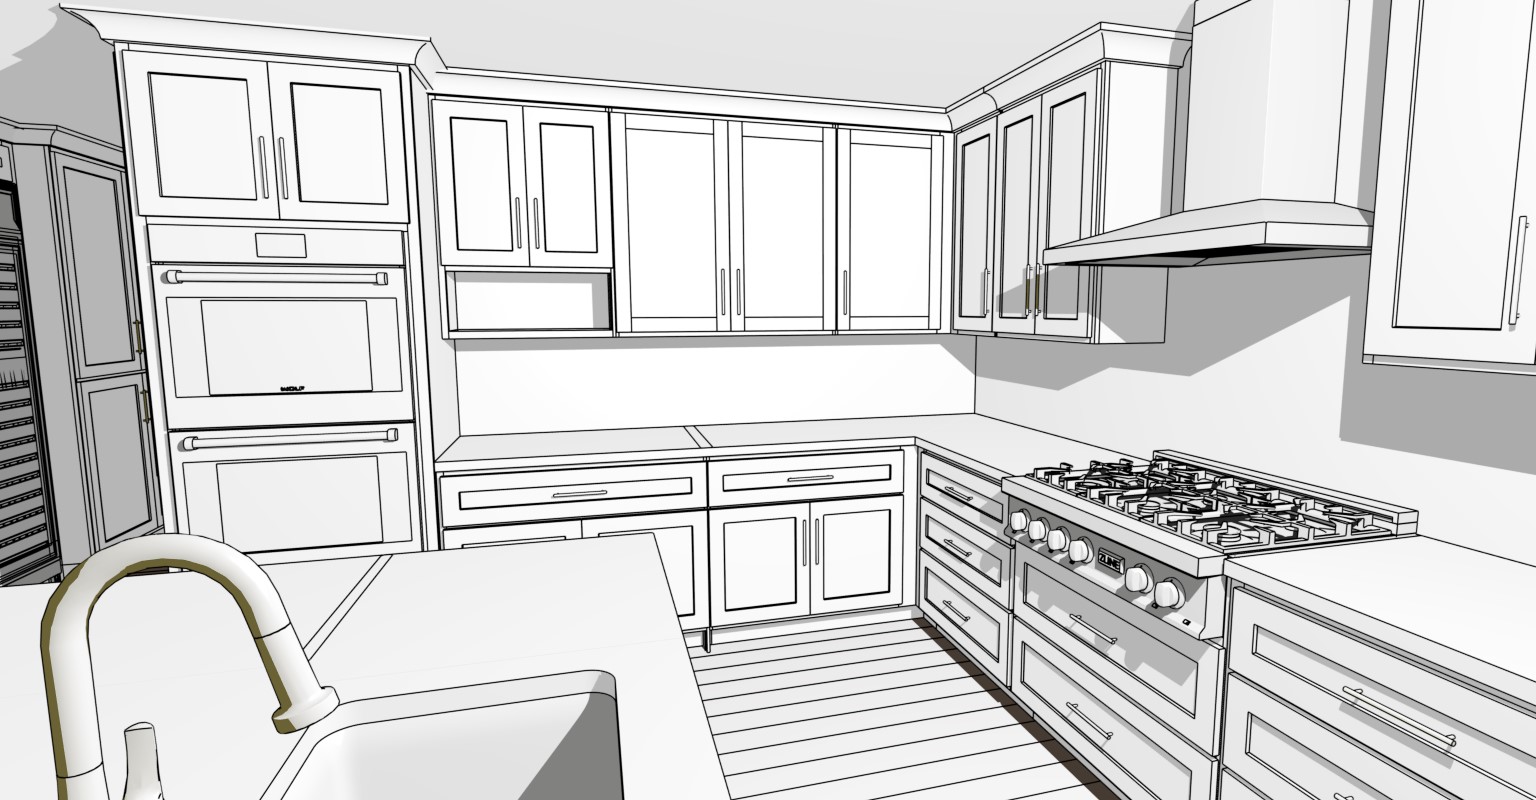 Technical illustration of a kitchen.